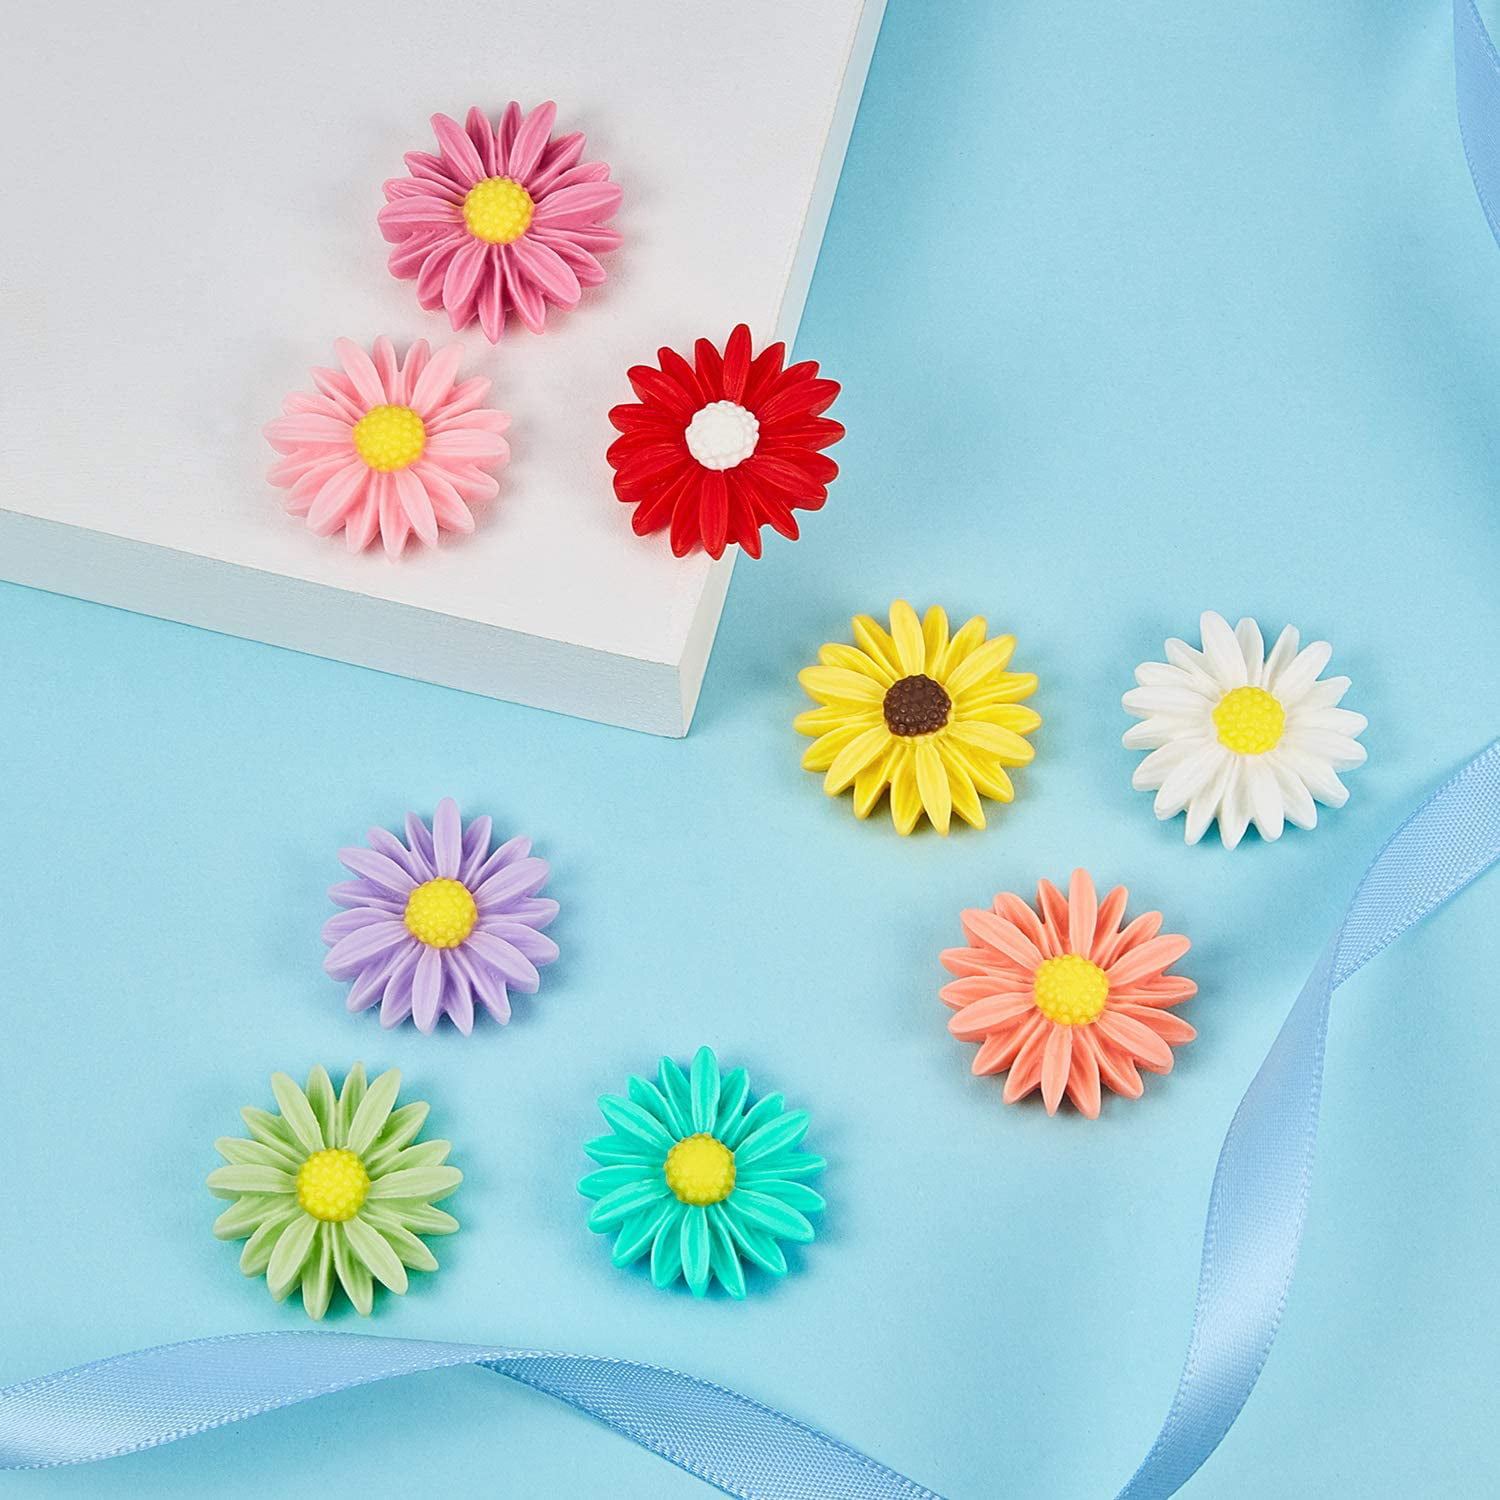 Colorful Clay Flowers Fridge Magnet Set of 4 Ceramics Floral Handmade Magnets